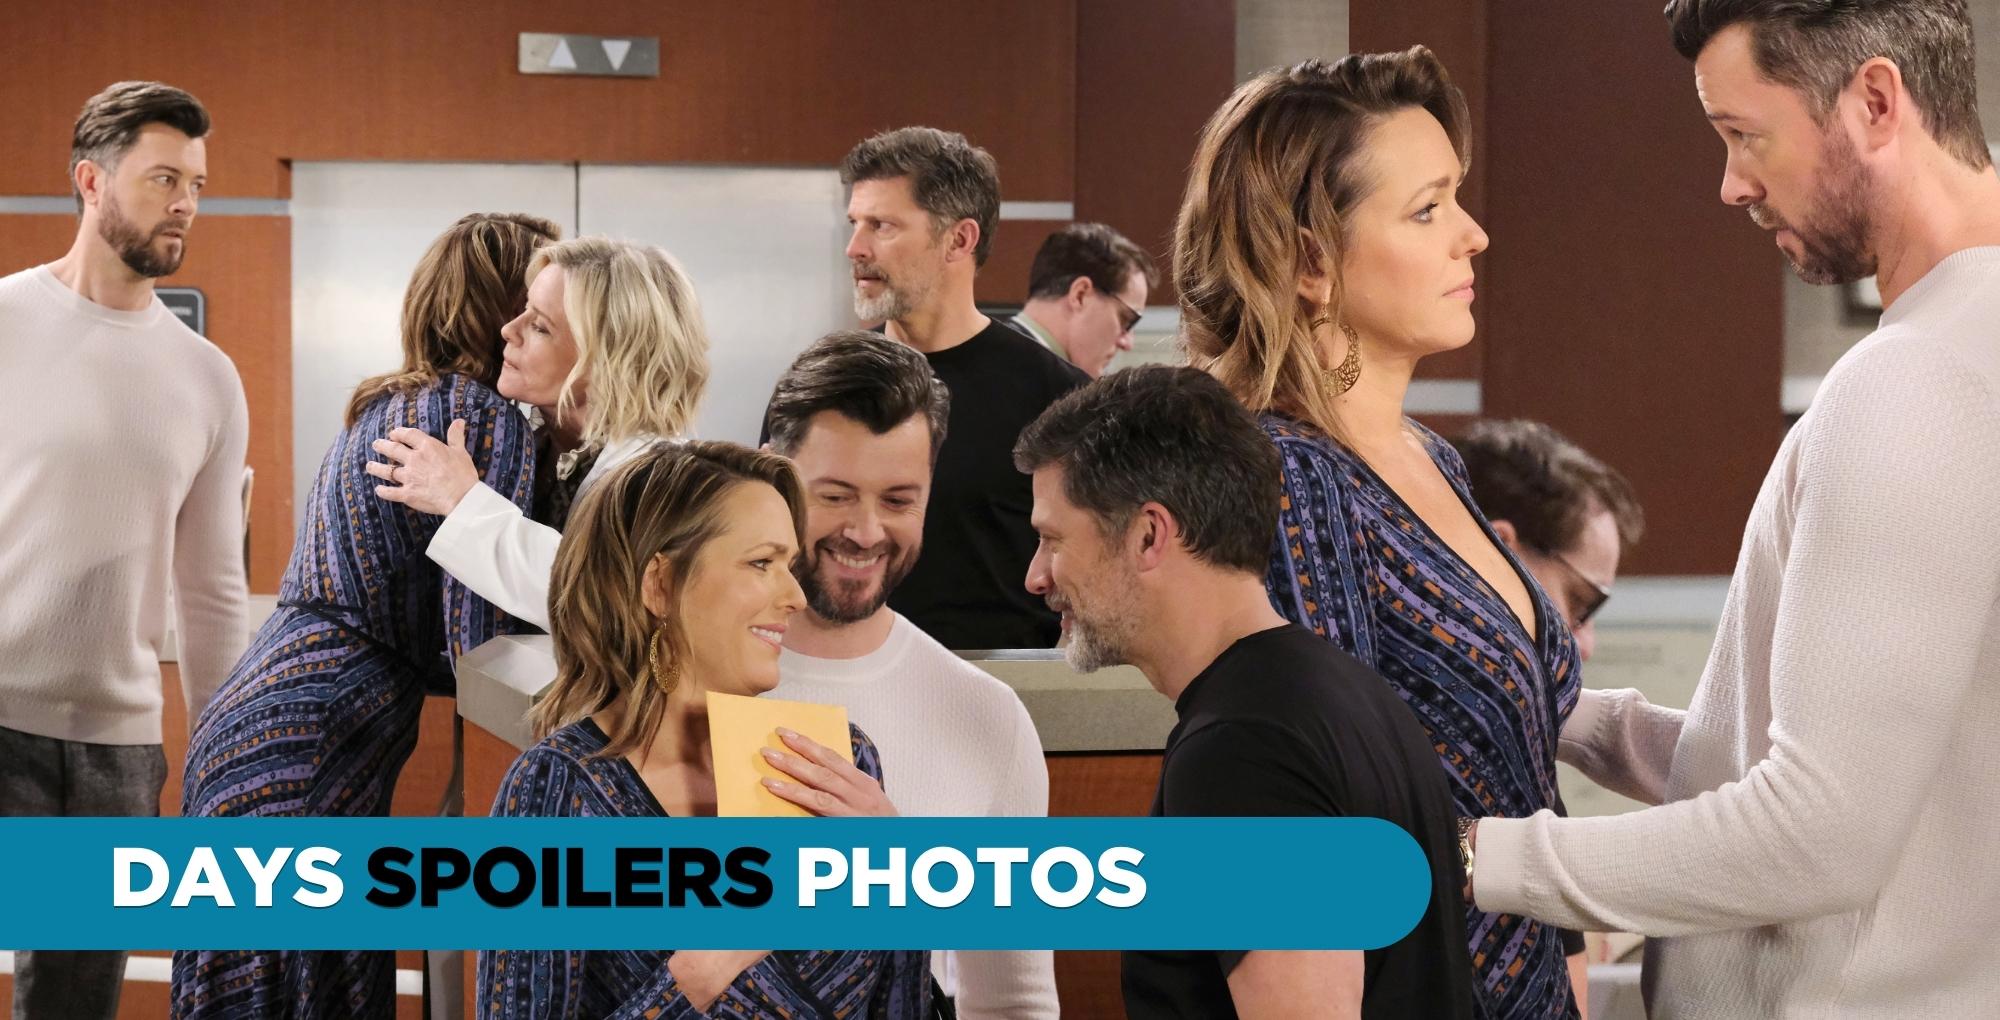 DAYS Spoilers Photos: The Paternity Results Are In